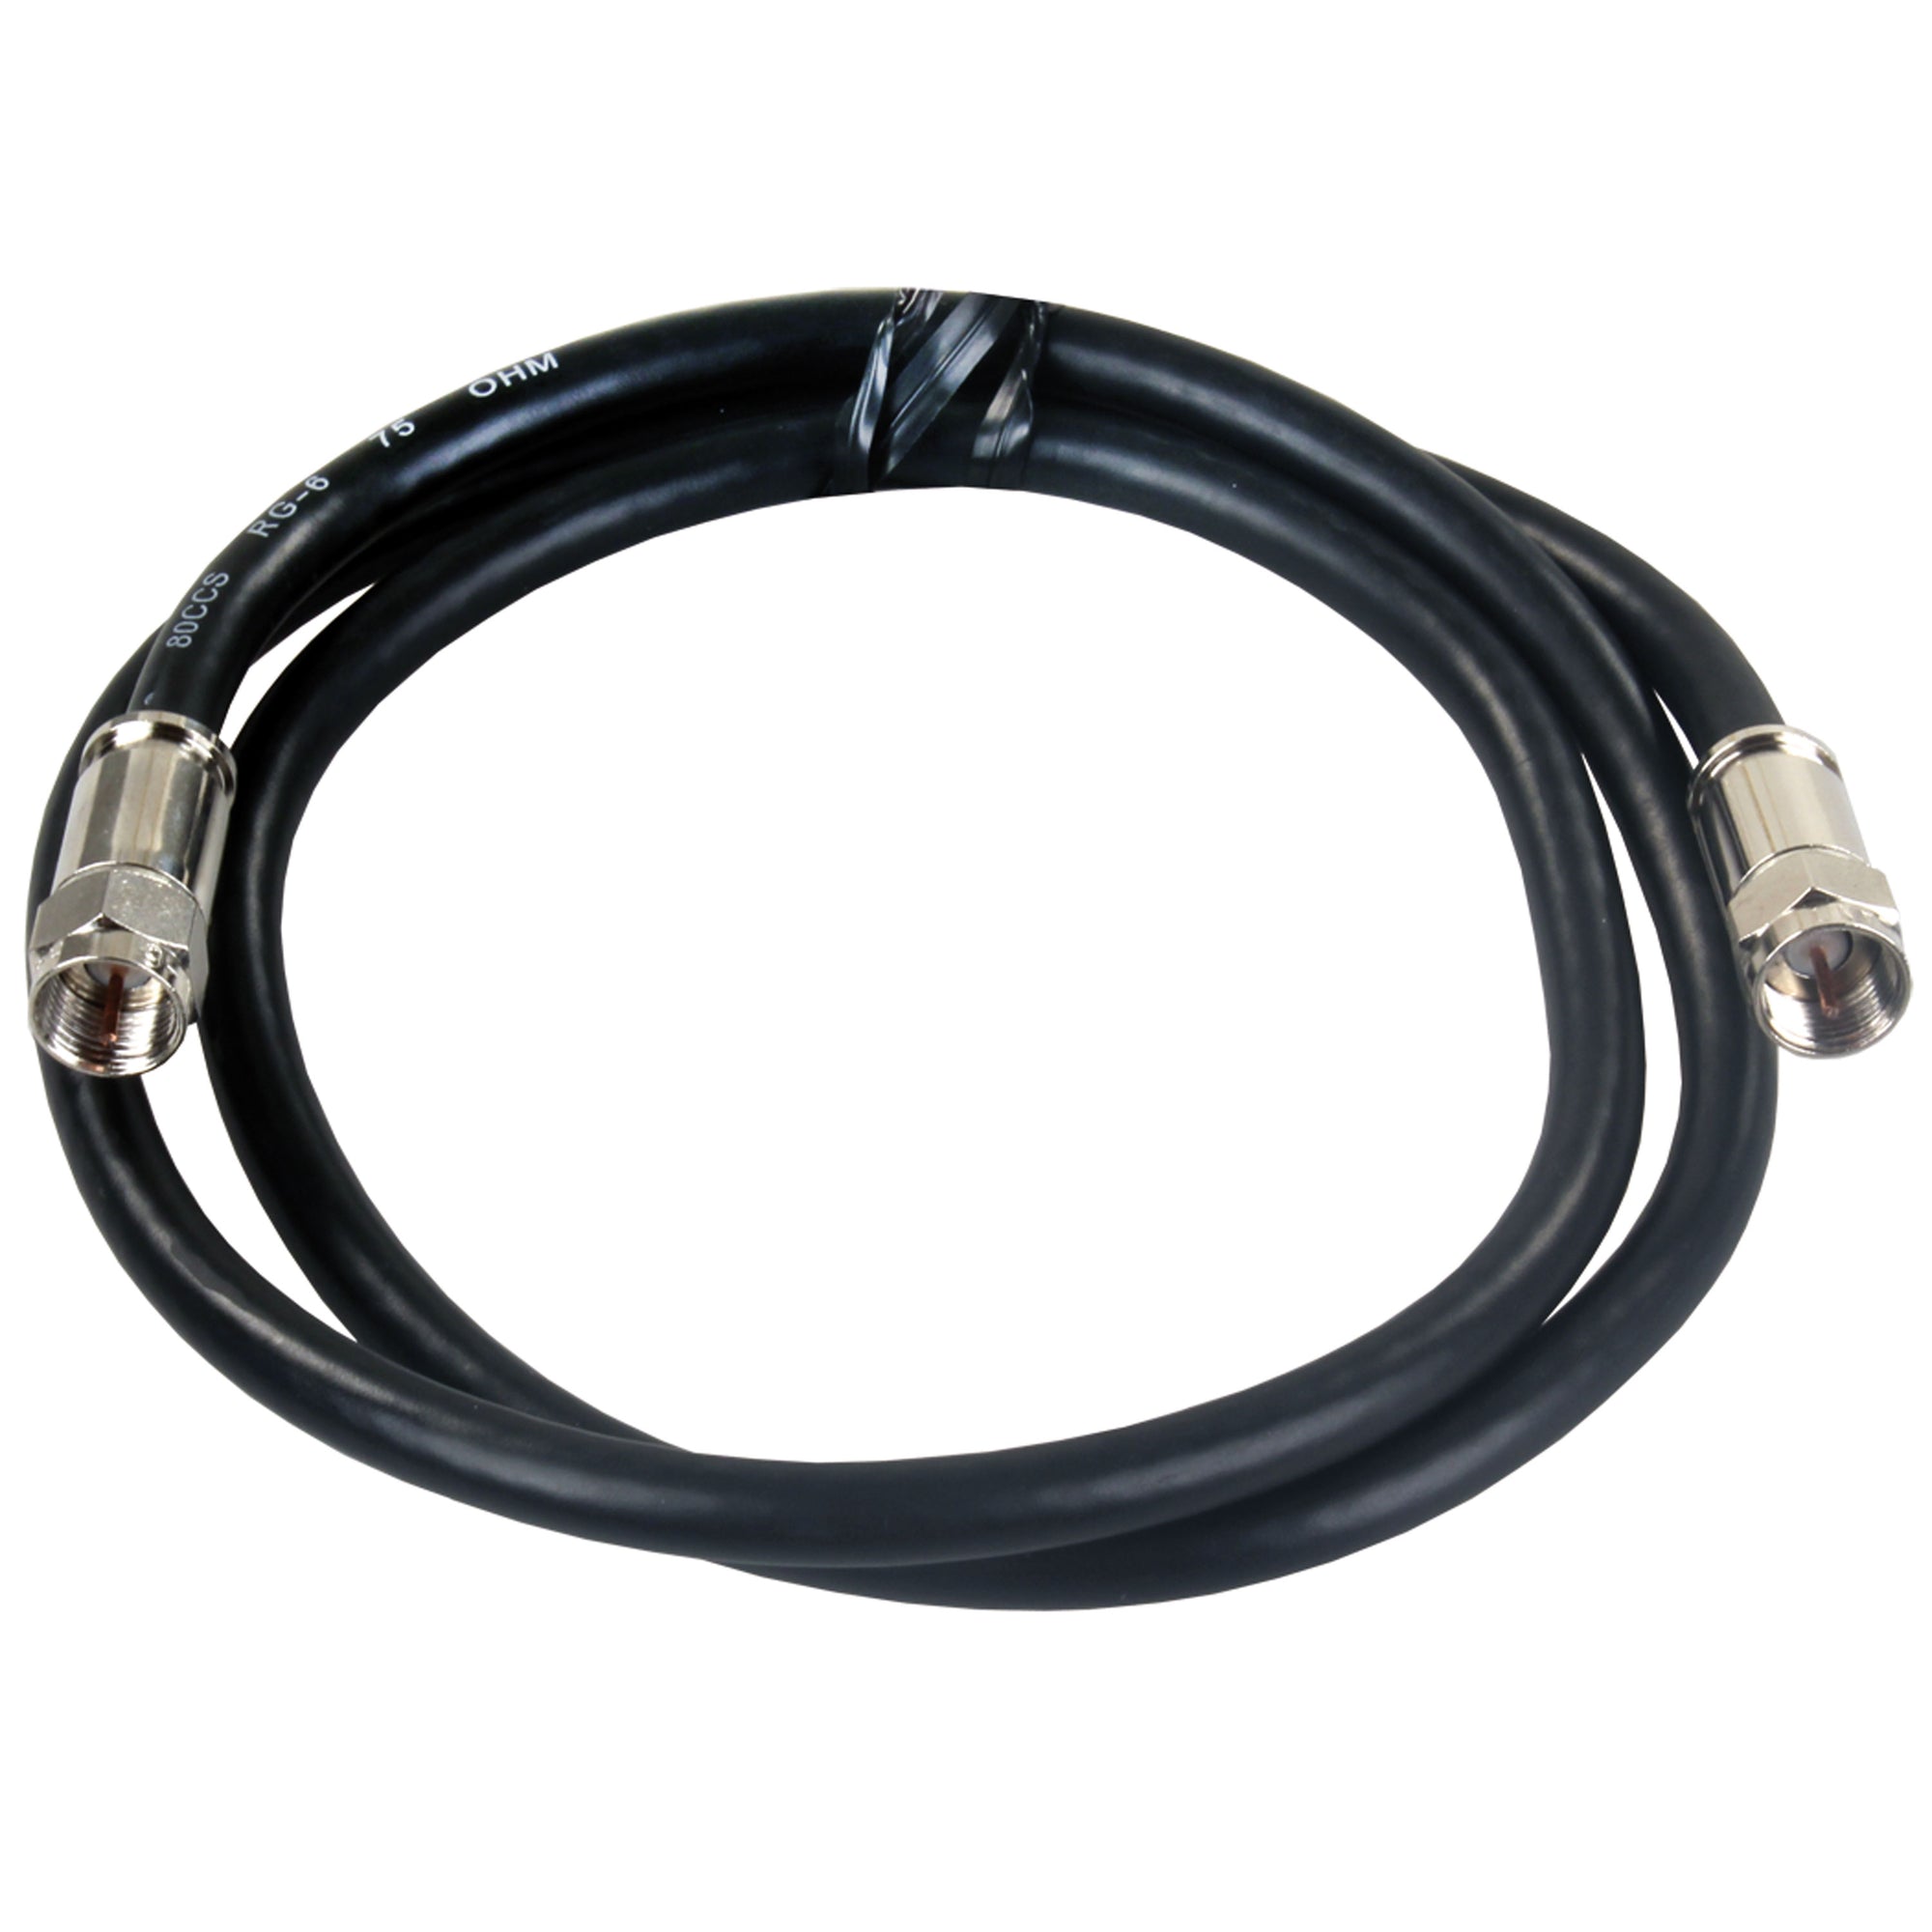 JR Products 47945 RG6 Exterior HD/Satellite Cable - 3'